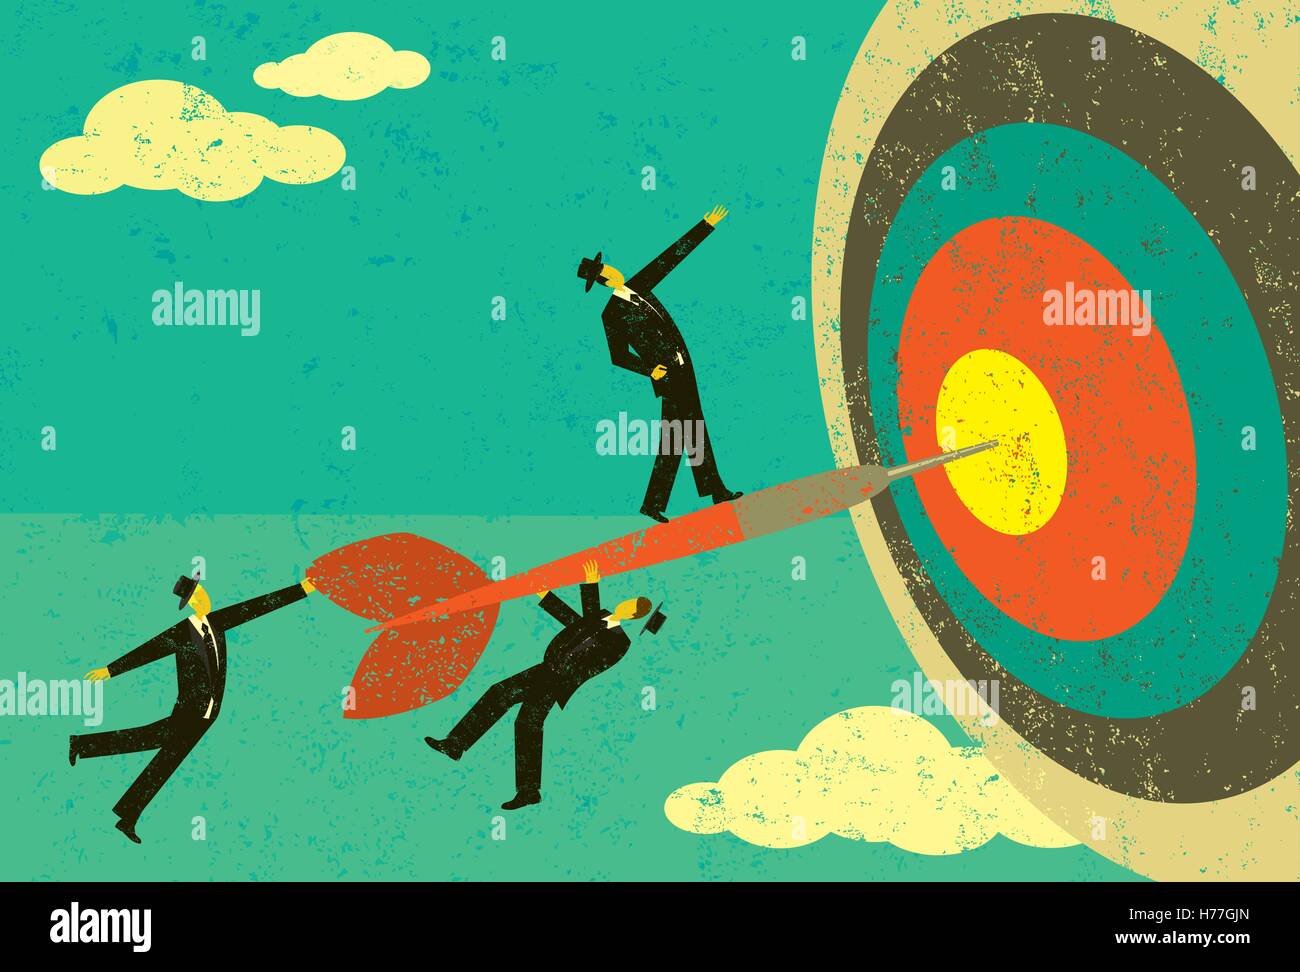 Hitting the Target Businessmen on a dart hitting the bull's eye. The men, dart & target are on a separate labeled layer from the Stock Vector